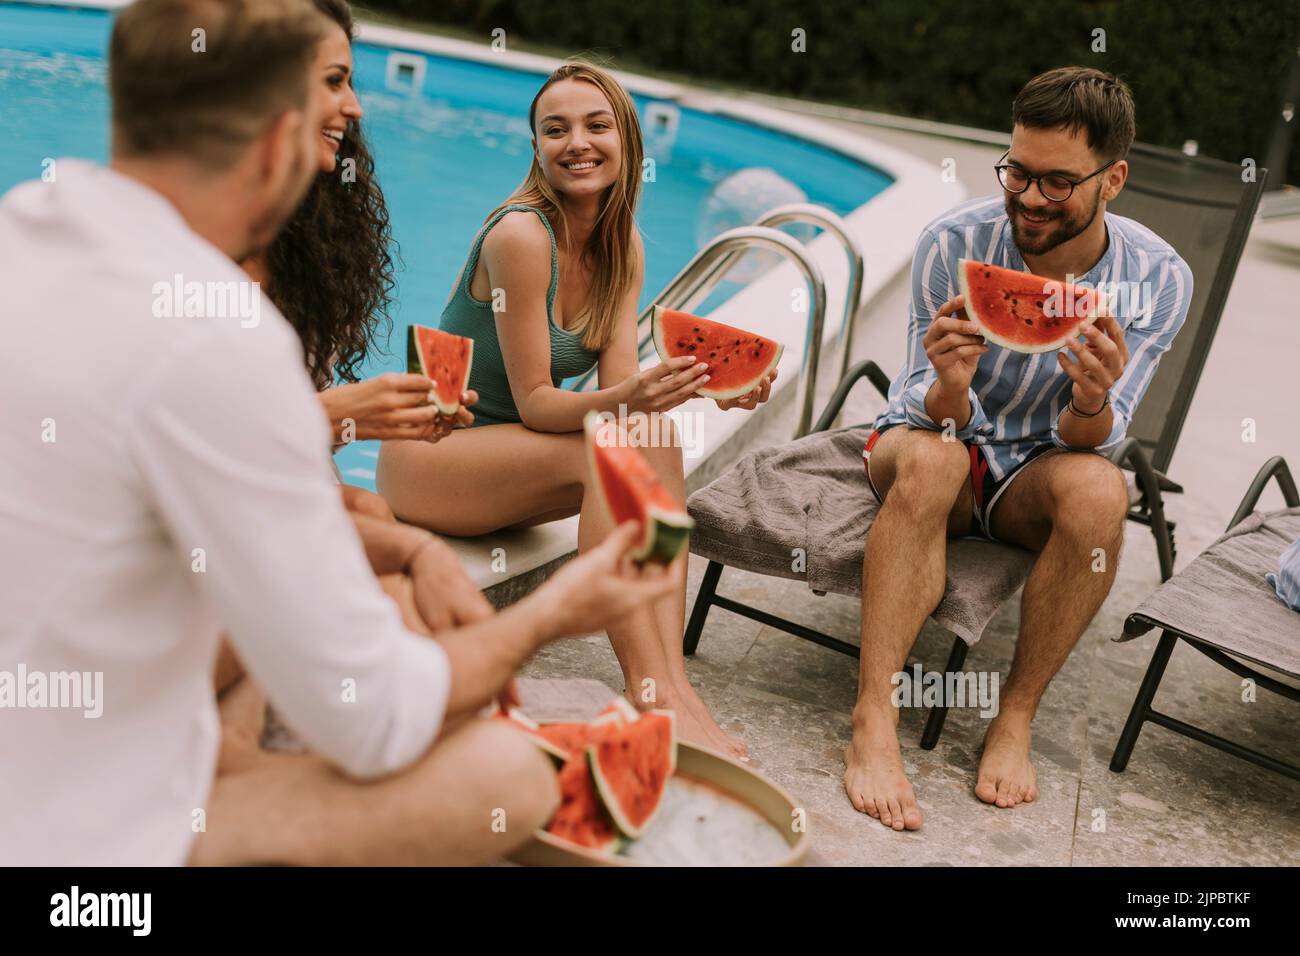 Group of young people sitting by the swimming pool and eating watermelon in the house backyard Stock Photo